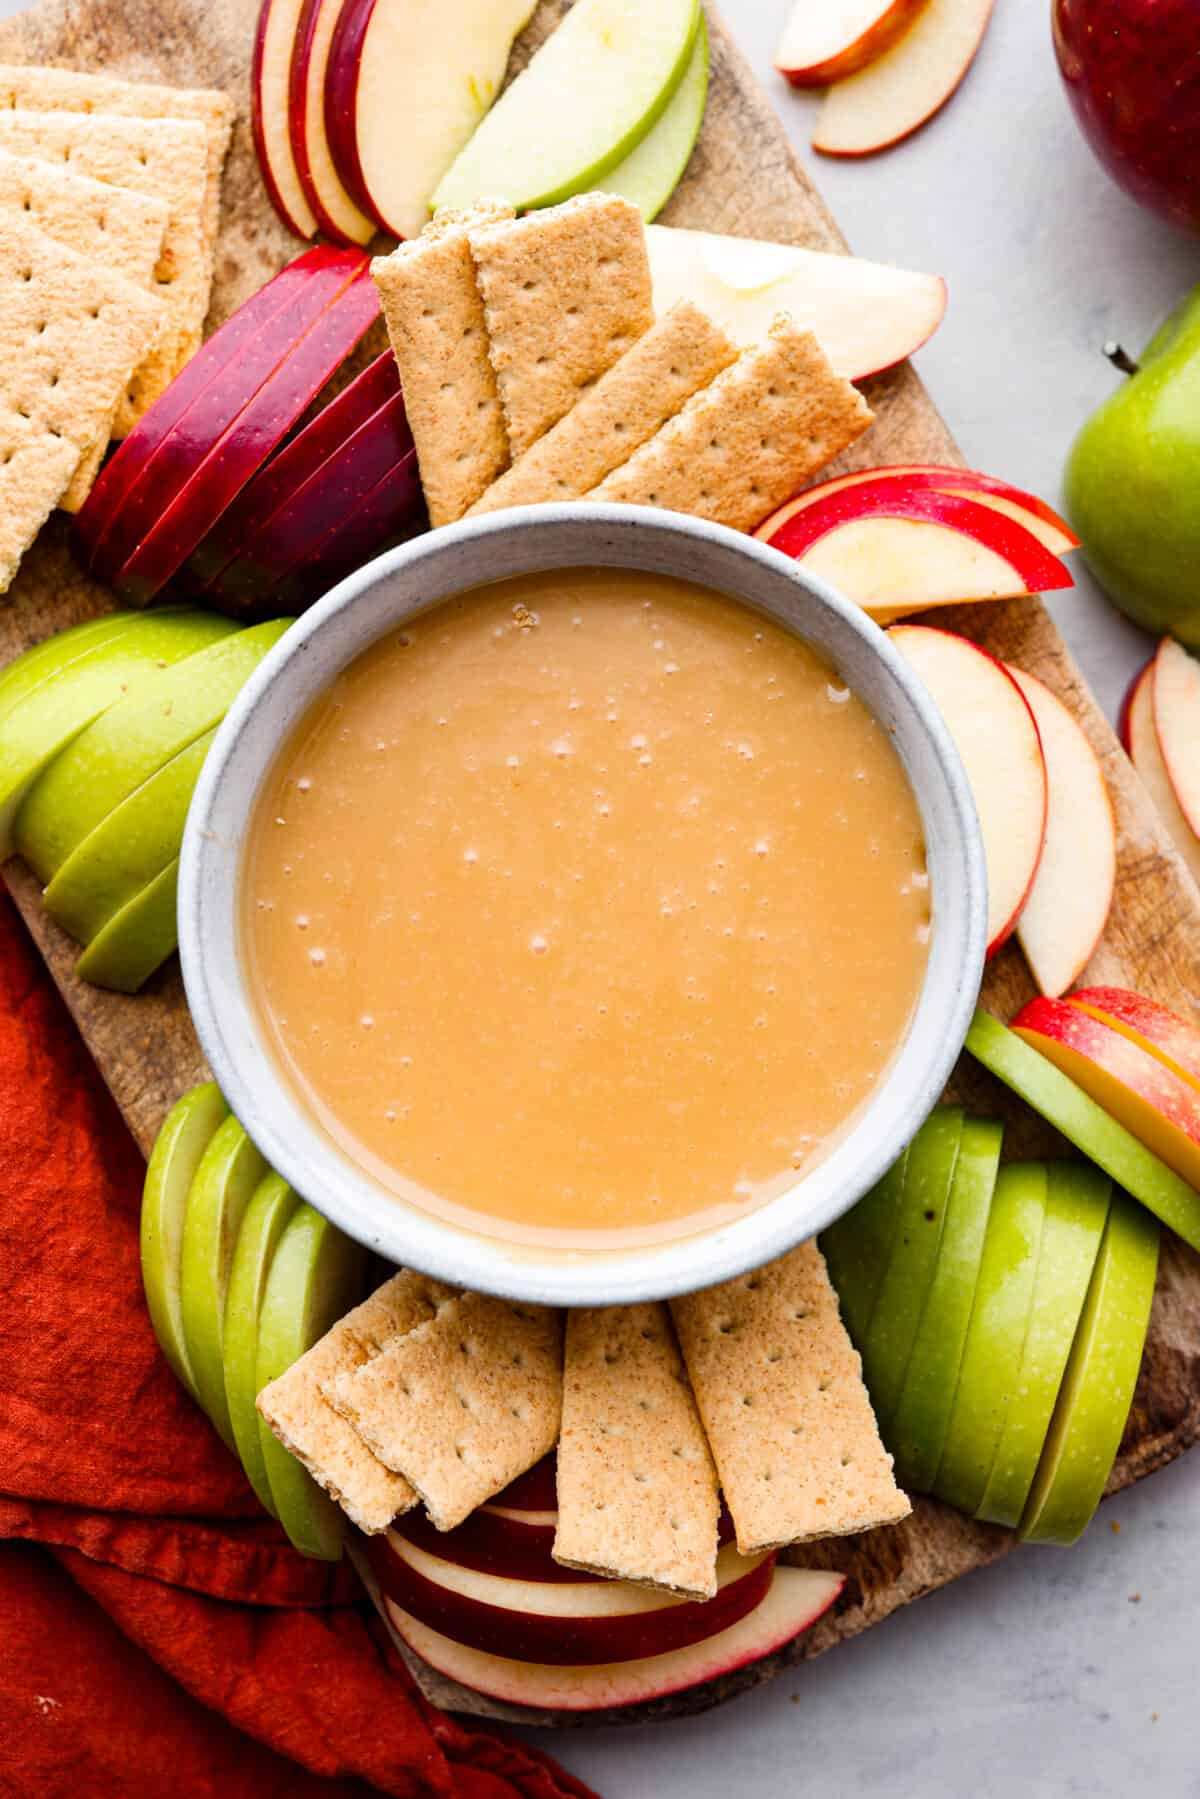 A bowl of caramel apple dip served with sliced apples and graham crackers.